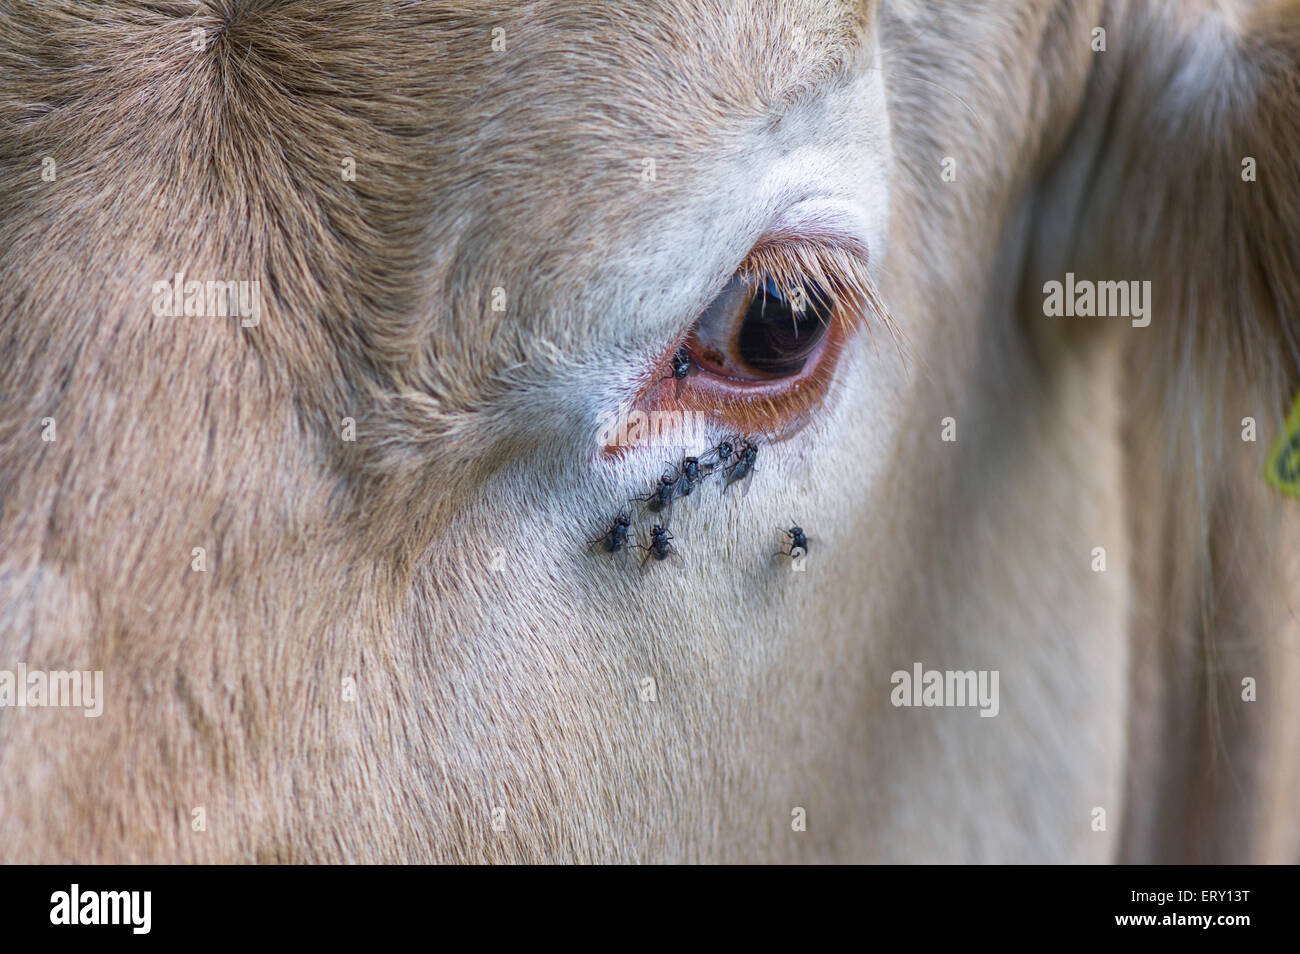 Blowflies or Bluebottle flies feeding off the teardrops from the eye of a cow. Stock Photo